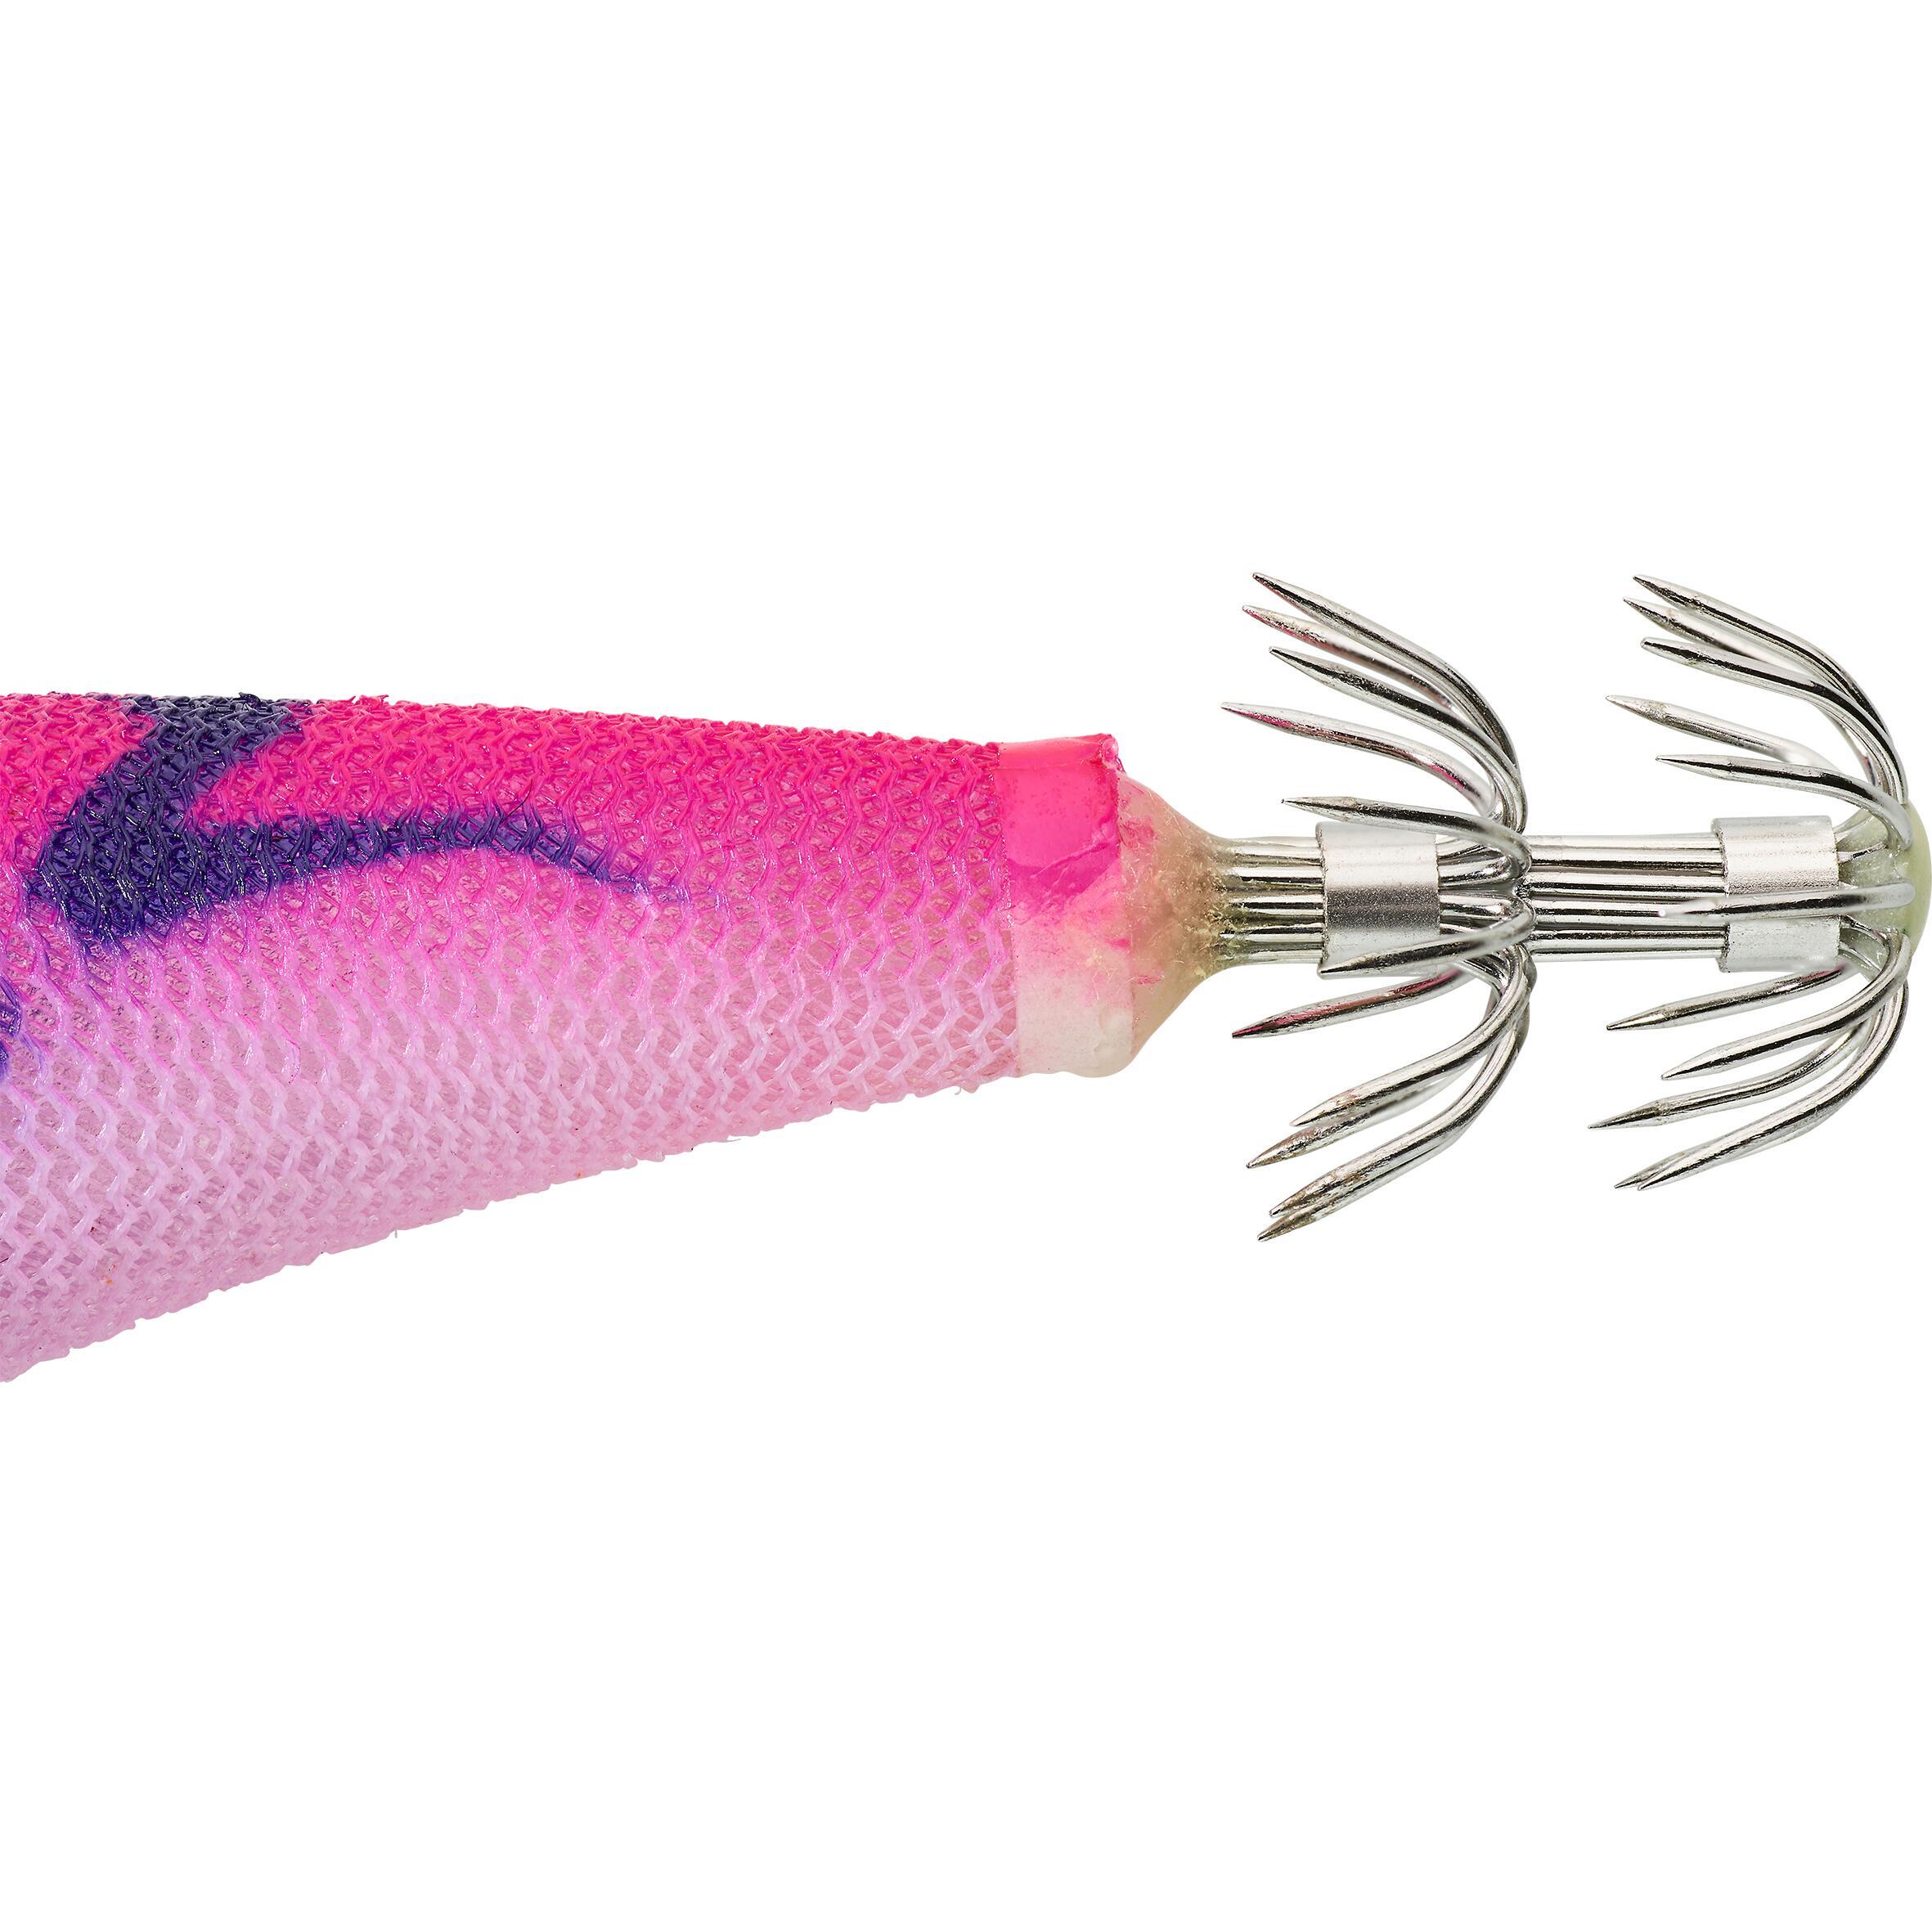 Sea fishing for cuttlefish and squid sinking jig EBI S 1.8/85 Pink 3/3